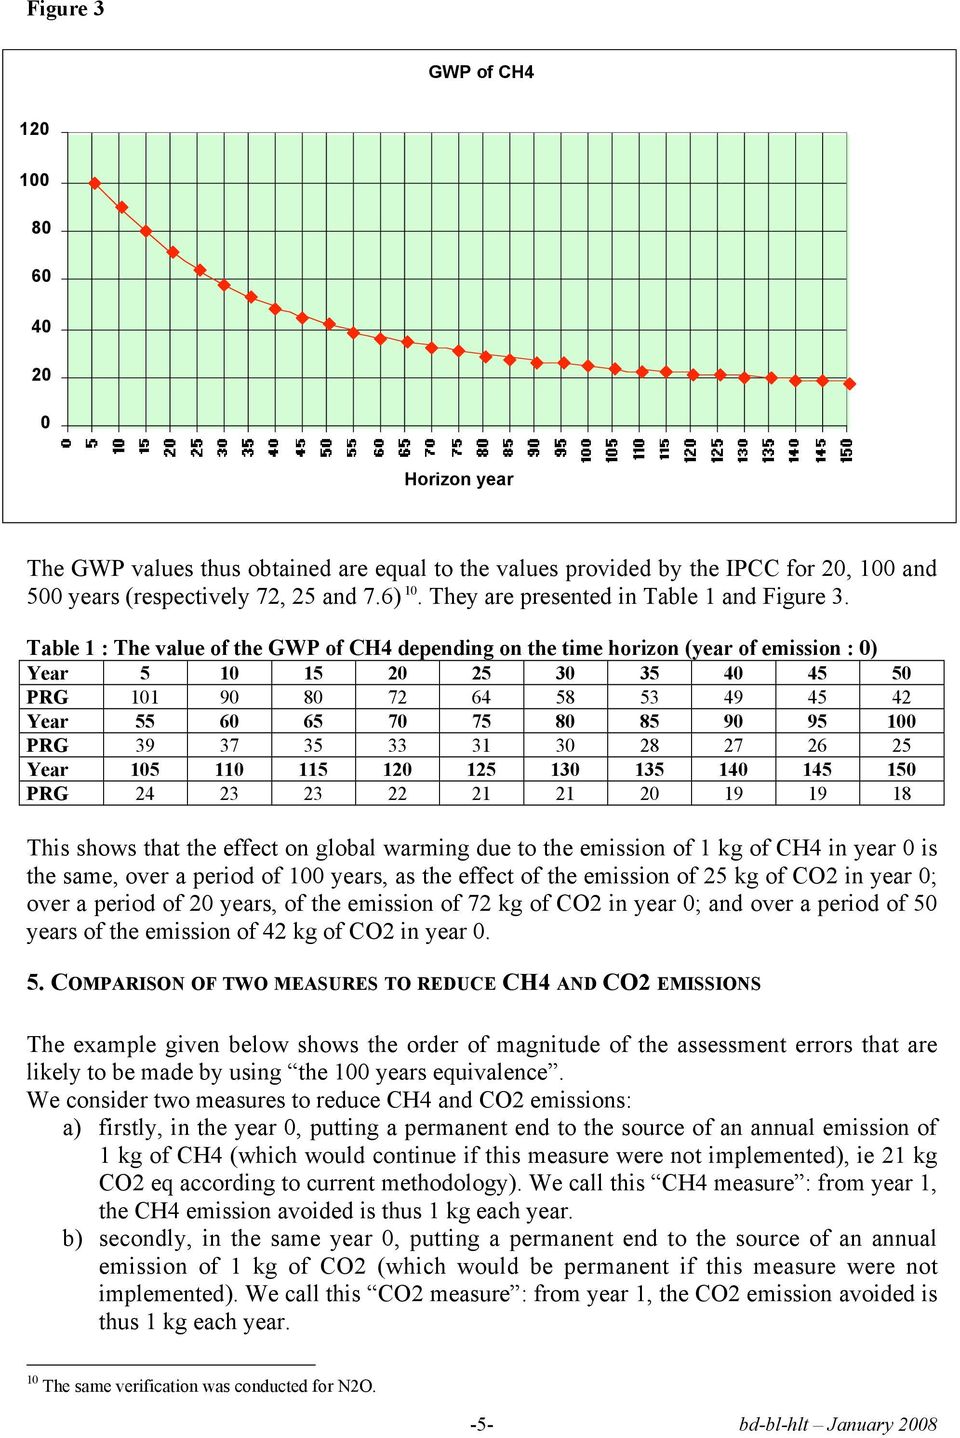 Table 1 : The value of the GWP of CH4 depending on the time horizon (year of emission : ) Year 5 1 15 2 25 3 35 4 45 5 PRG 11 9 8 72 64 58 53 49 45 42 Year 55 6 65 7 75 8 85 9 95 1 PRG 39 37 35 33 31